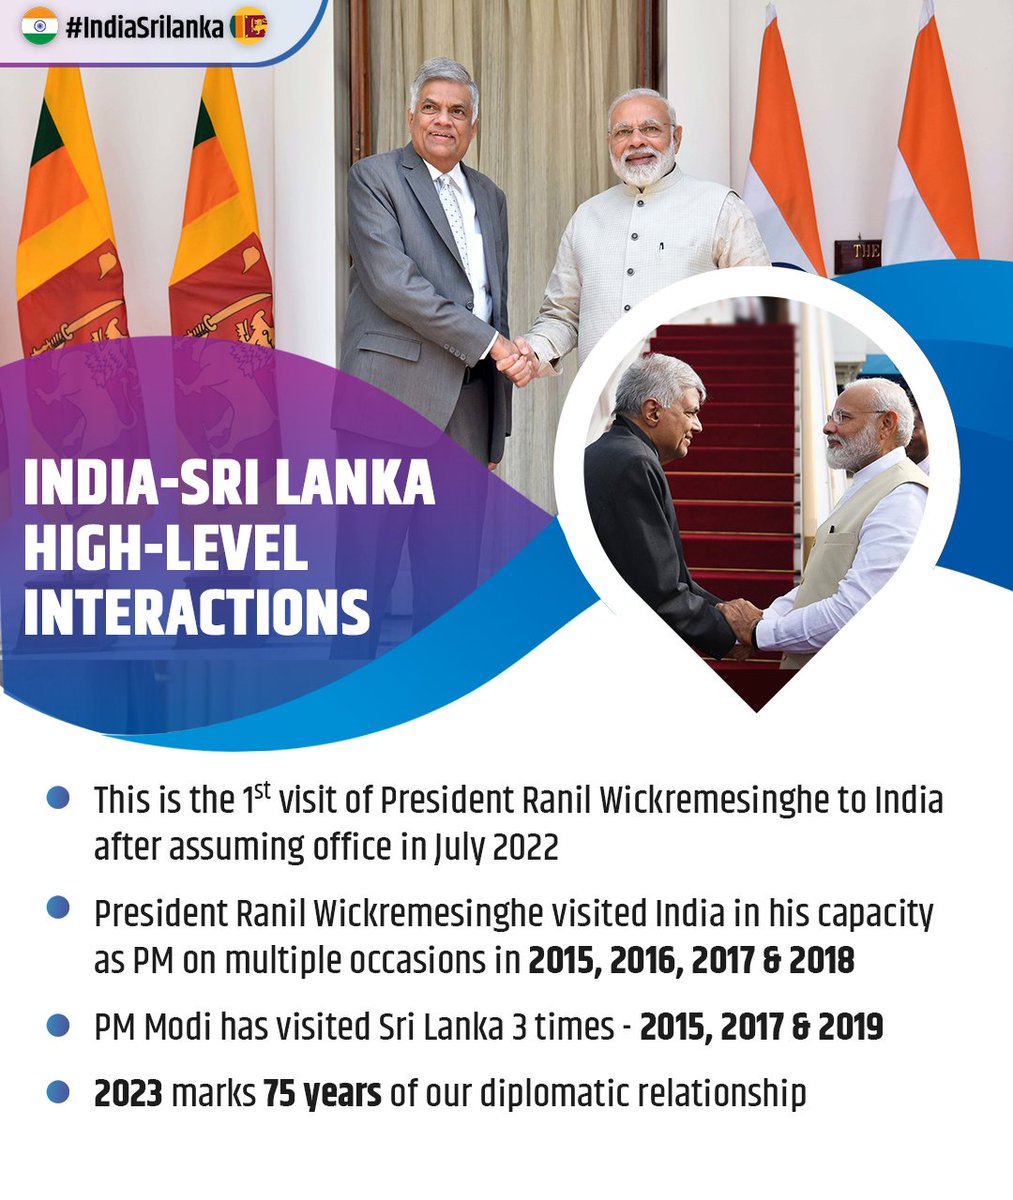 🇮🇳-🇱🇰| Taking forward our #NeighbourhoodFirst policy & Vision SAGAR.

President Ranil Wickremesinghe @RW_UNP arrives in New Delhi; his first visit to India since assuming the current responsibilities.

Here is an overview of the regular high-level interactions between